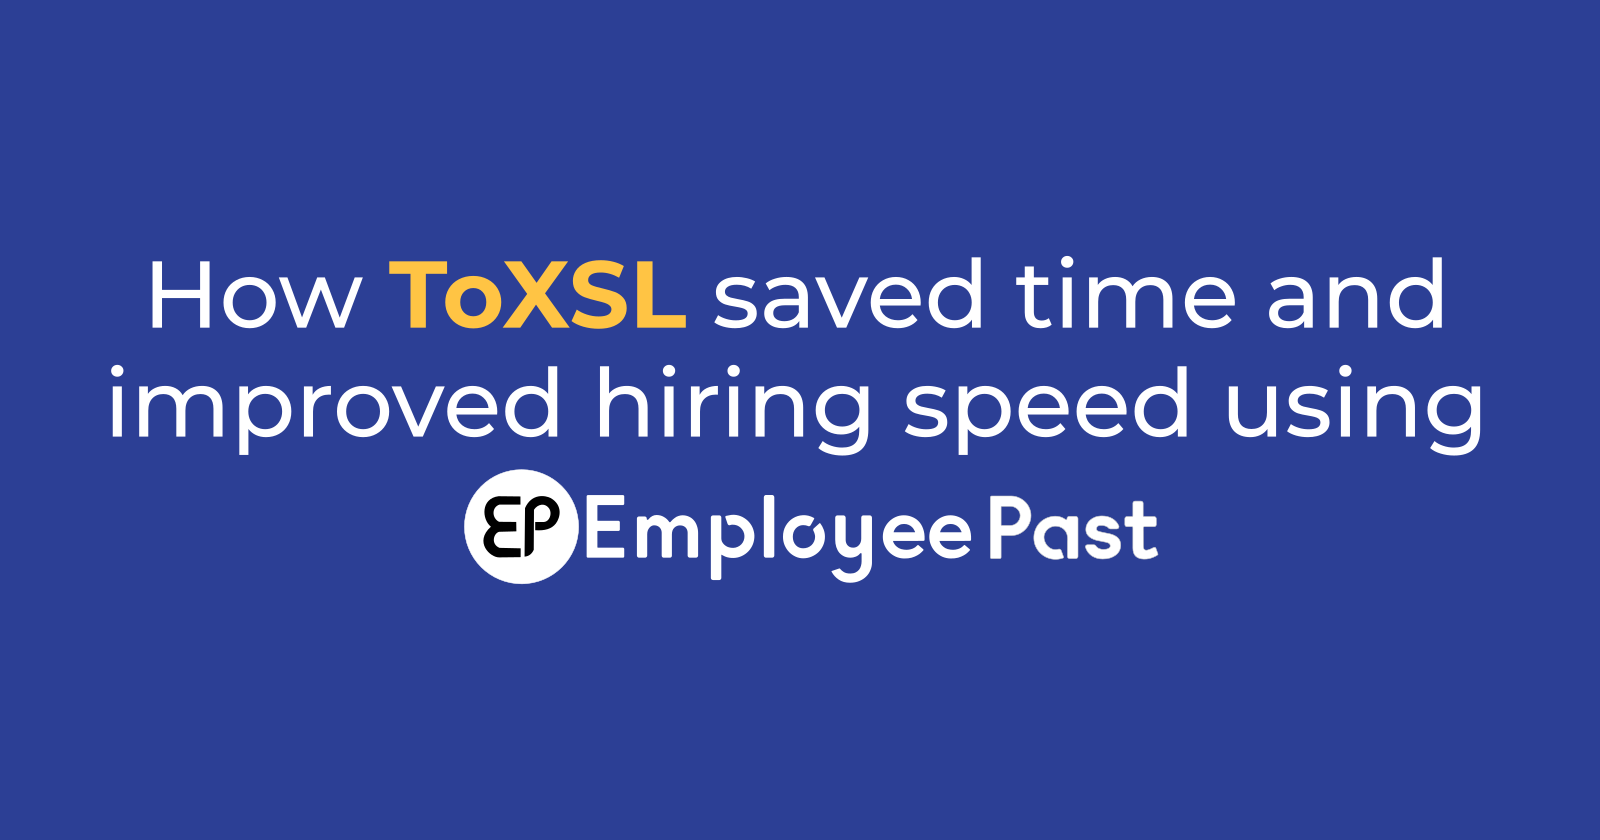 How ToXSL saved time and improved hiring speed using EmployeePast?